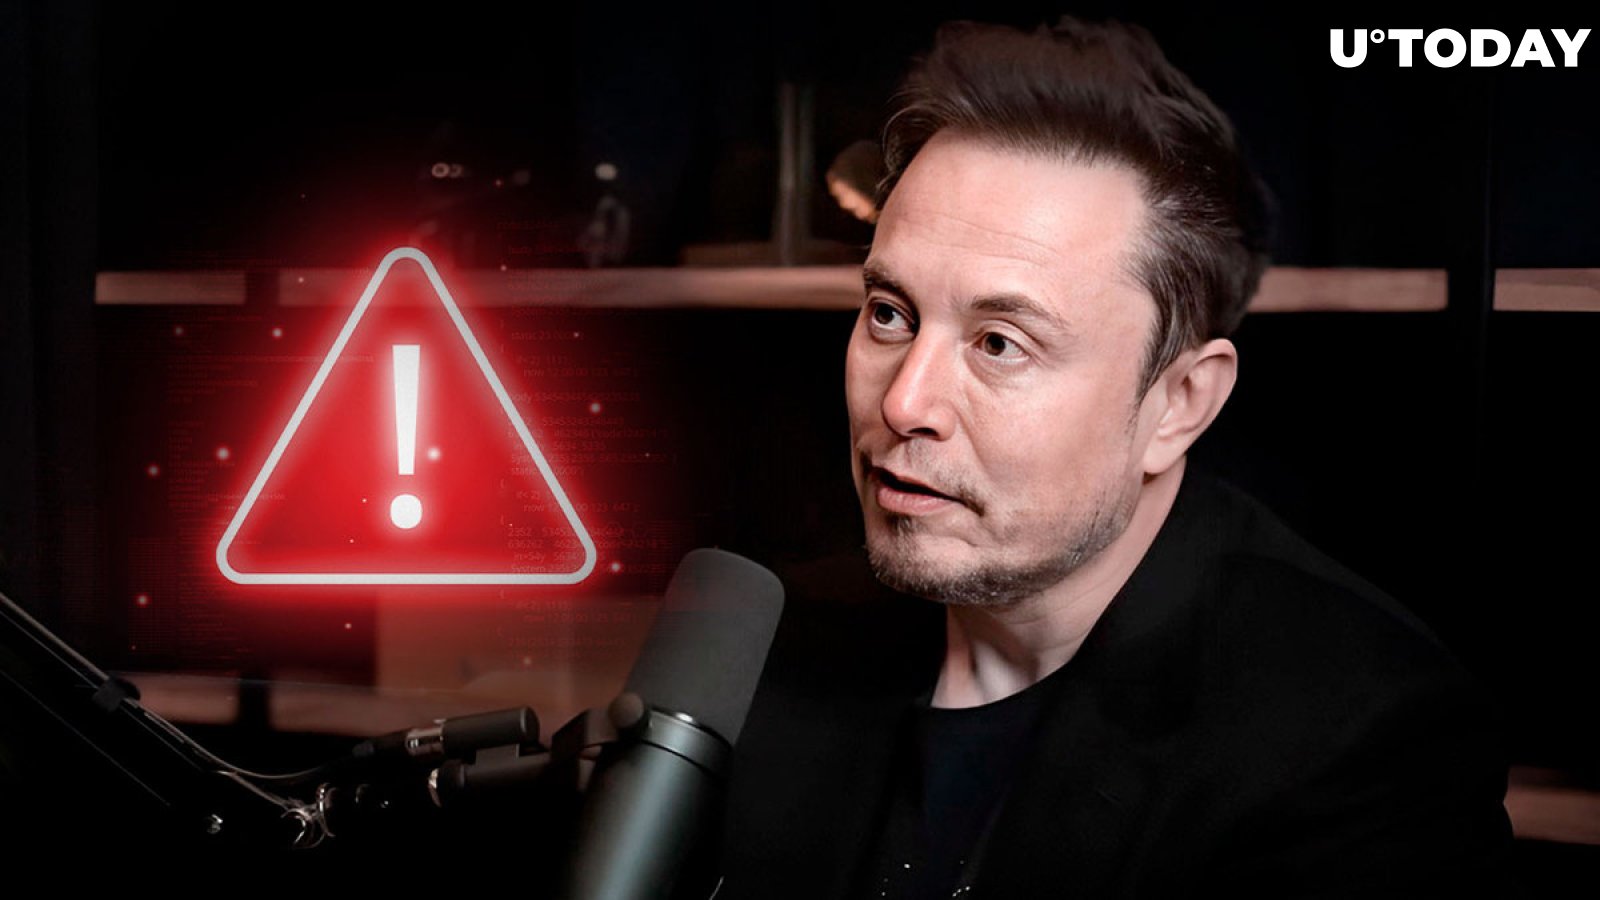 Crypto Alert Issued Related to Elon Musk, What It Is About